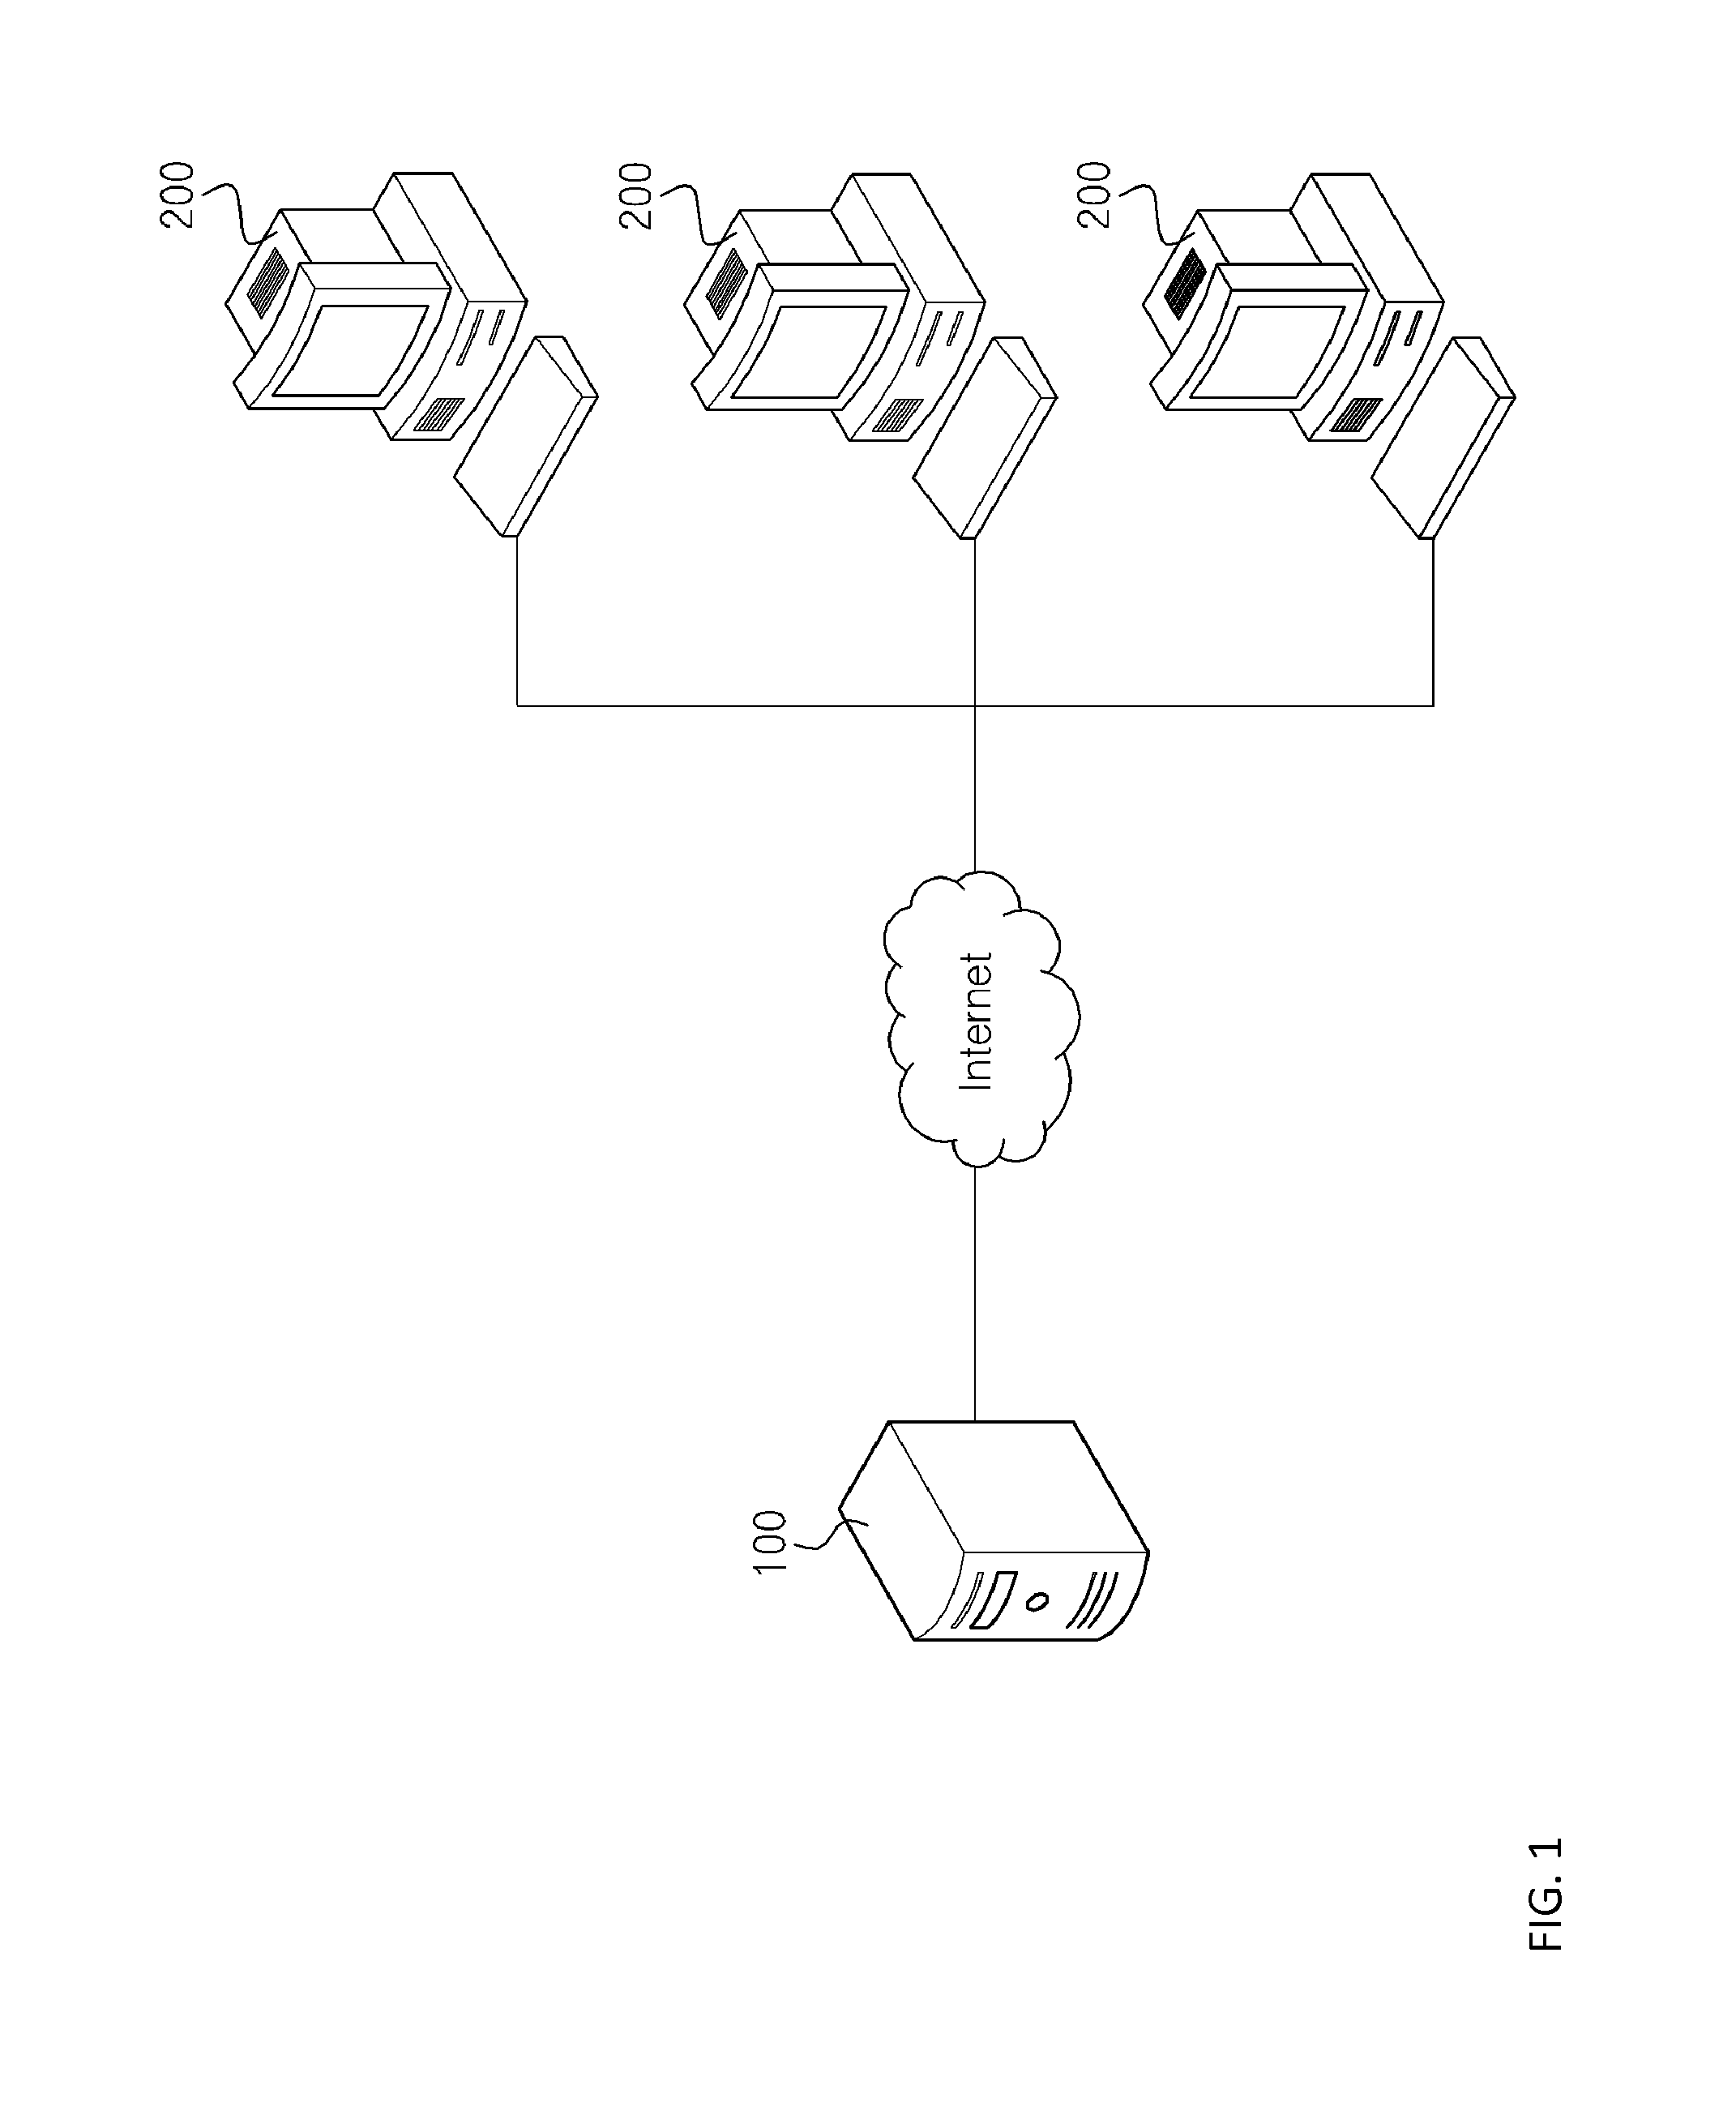 Remote managing system and method